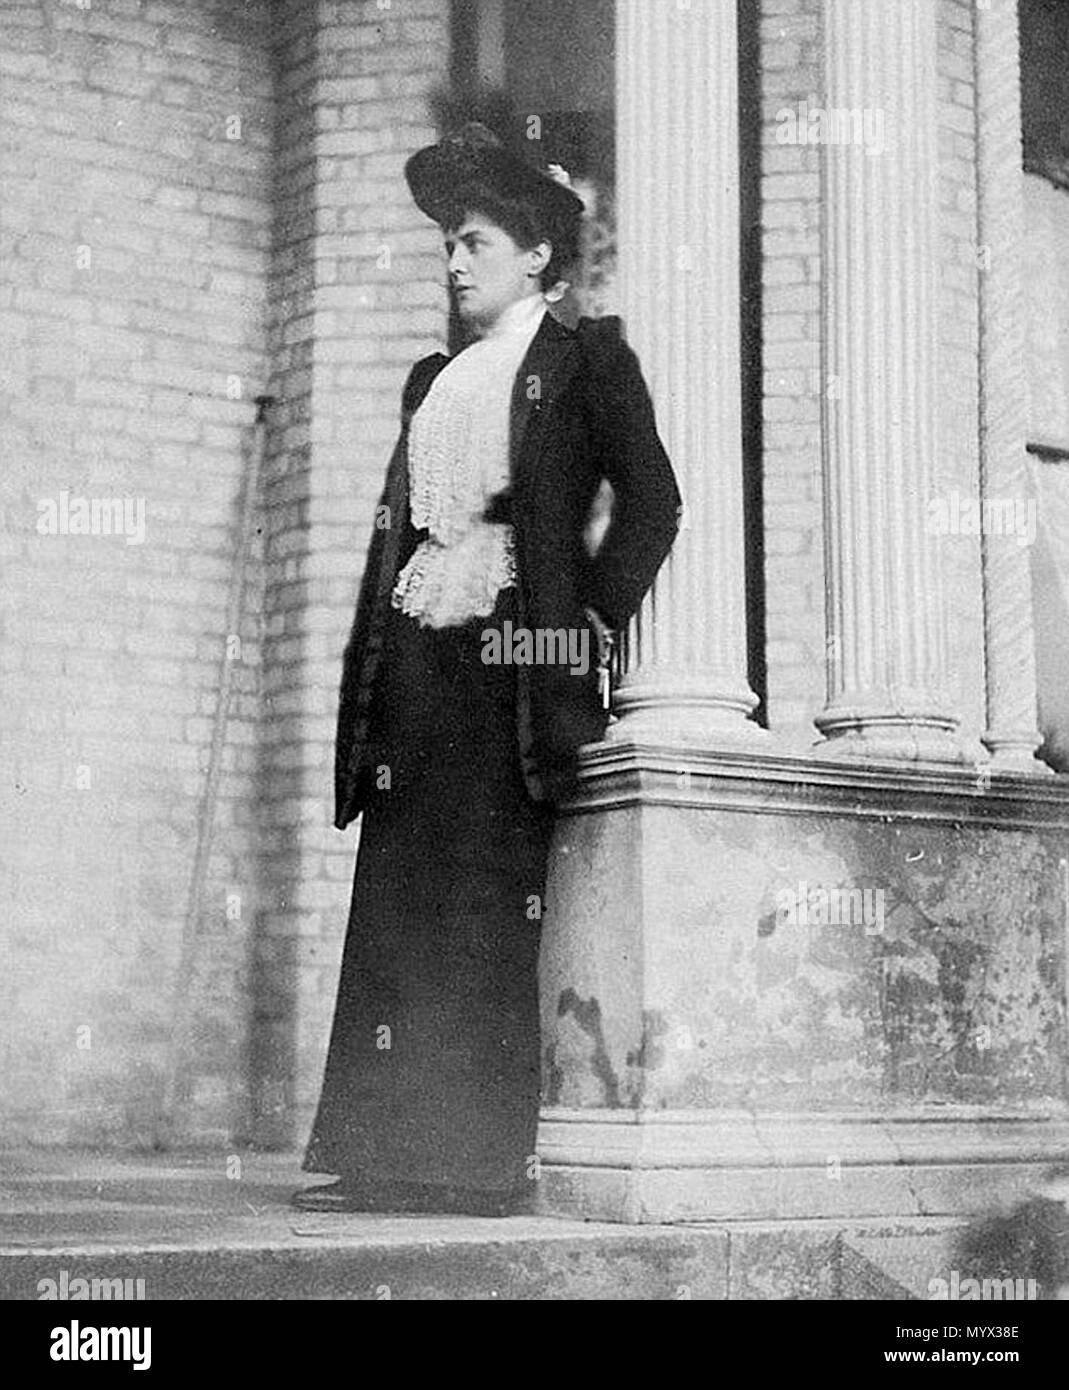 . English: Lady Randolph Churchill in 1892, leaning on a column from the house of Lady Cornelia Baroness Wimborne (1847-1927), sister of Lord Randolph Spencer-Churchill, at Canford Magna near Bournemouth. Français : Lady Randolph Churchill en 1892, appuyée sur une colonne de la maison de Lady Cornelia Baronne Wimborne (1847-1927), sœur de Lord Randolph Spencer-Churchill, à Canford Magna près de Bournemouth.  . 1892. Unknown 62 Lady Jennie Spencer-Churchill (1854-1921) (D) Stock Photo